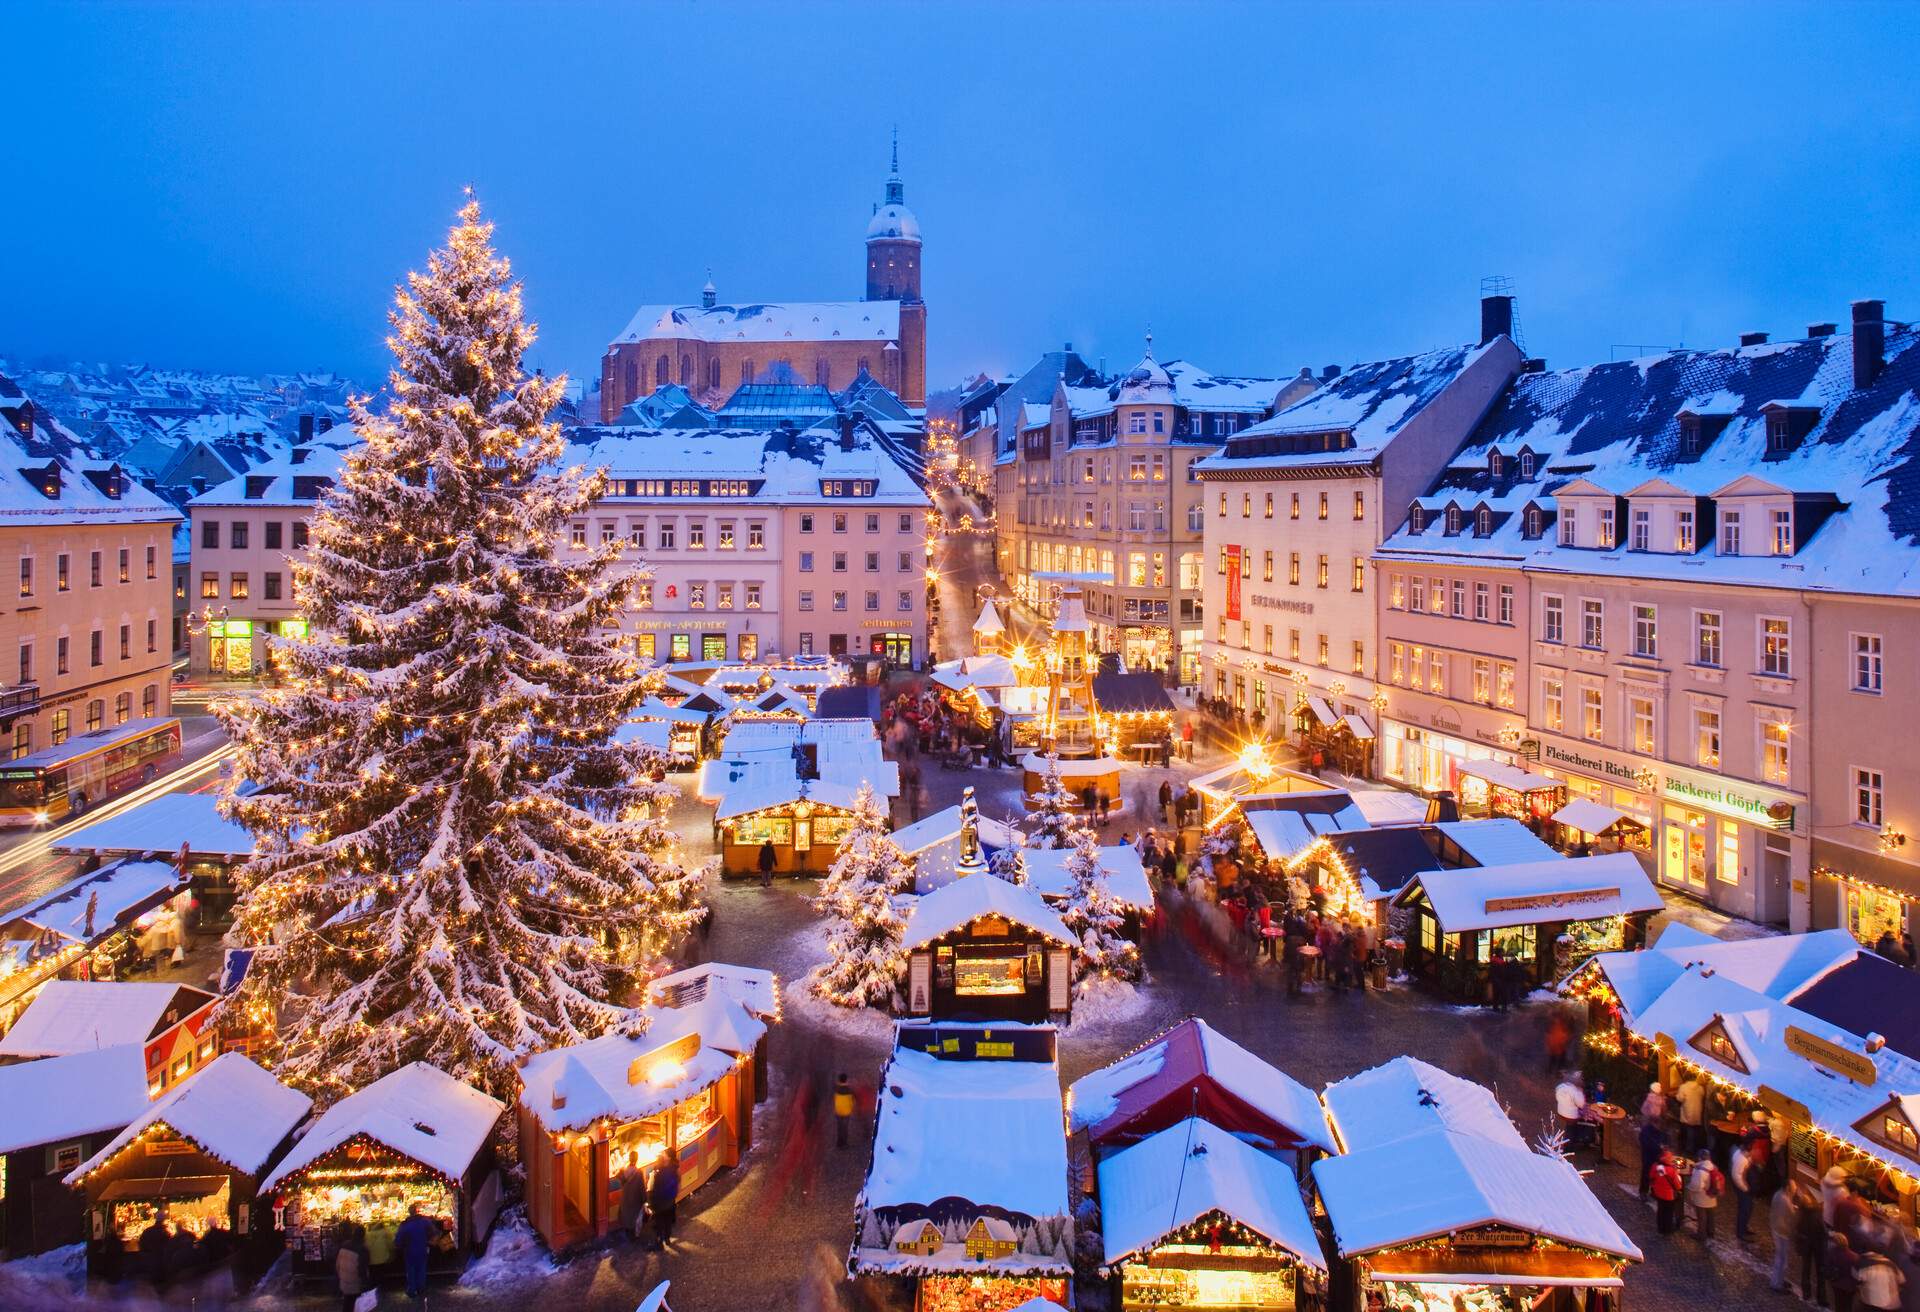 DEST_GERMANY_CHRISTMAS_MARKET_ANNABERG_BUCHHOLZ_GettyImages-521667014